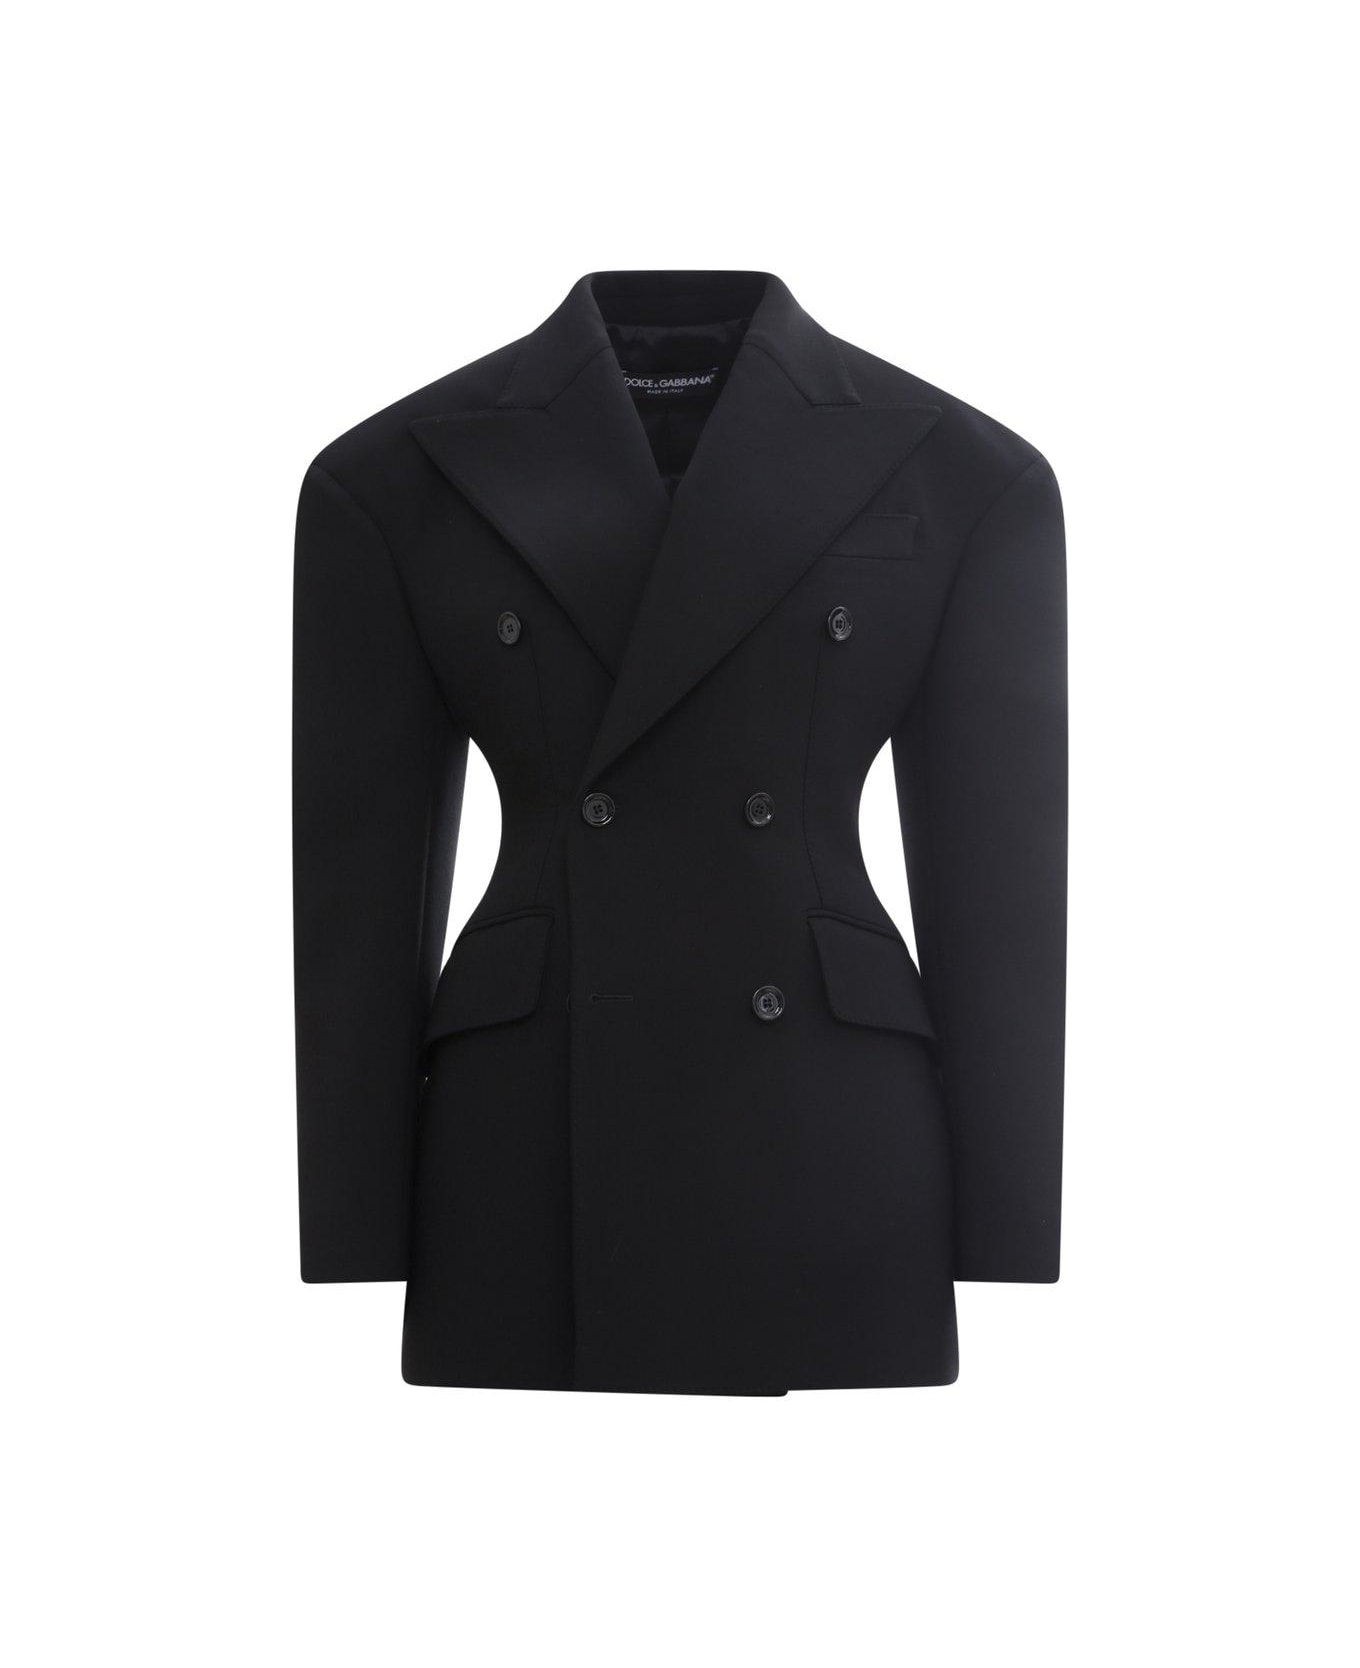 Dolce & Gabbana Double-breasted Technical Crepe Jacket - Nero コート